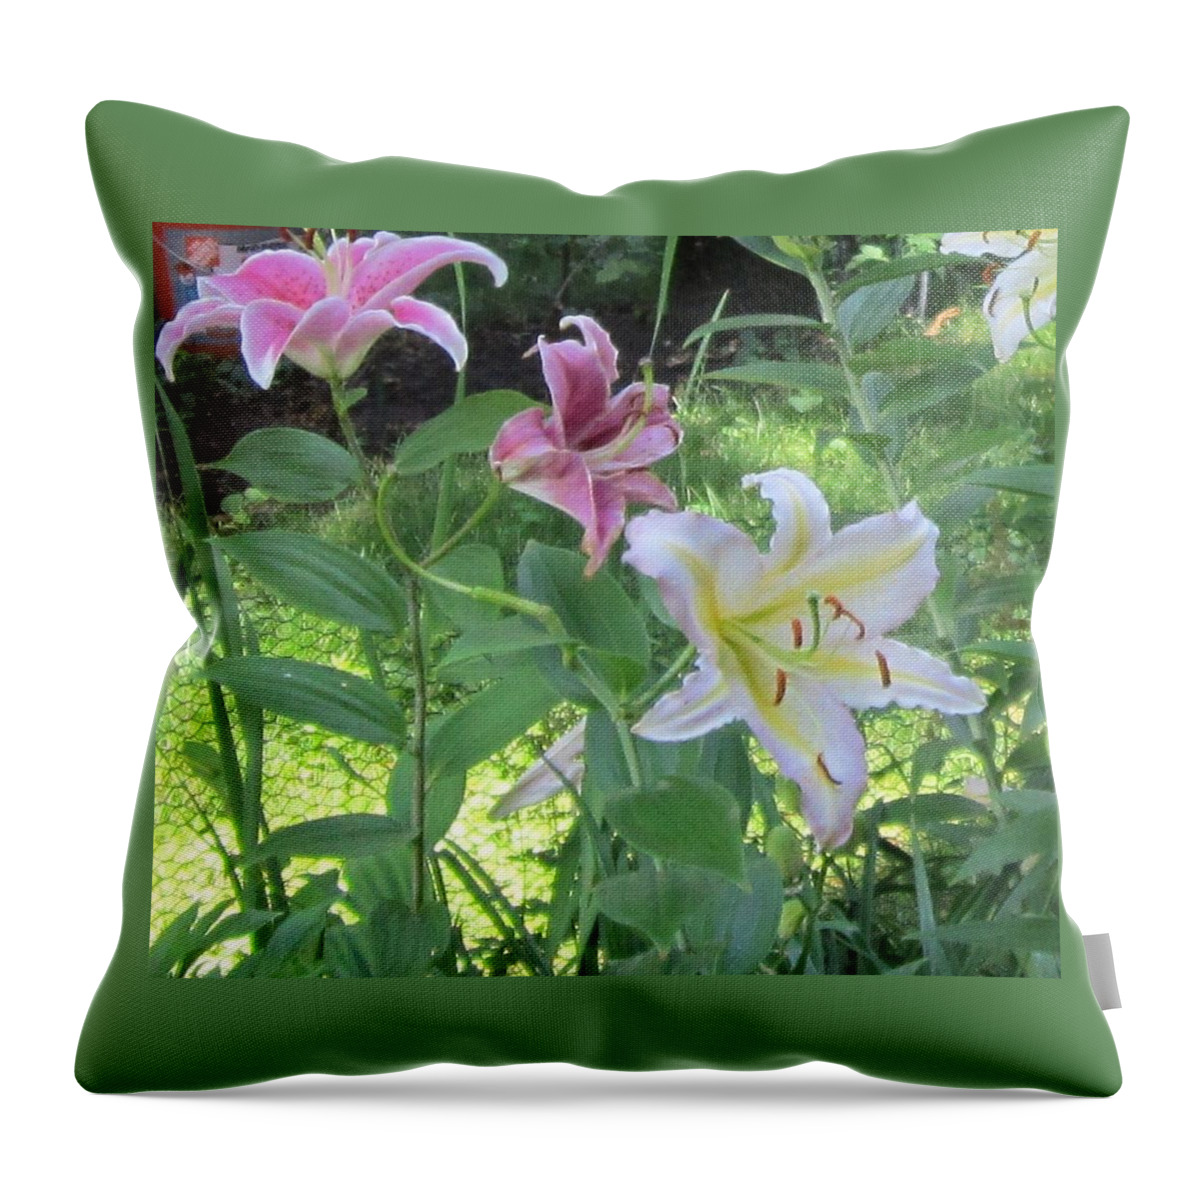 Landscape Throw Pillow featuring the photograph Pink and White Stargazer Lilies by Glenda Crigger